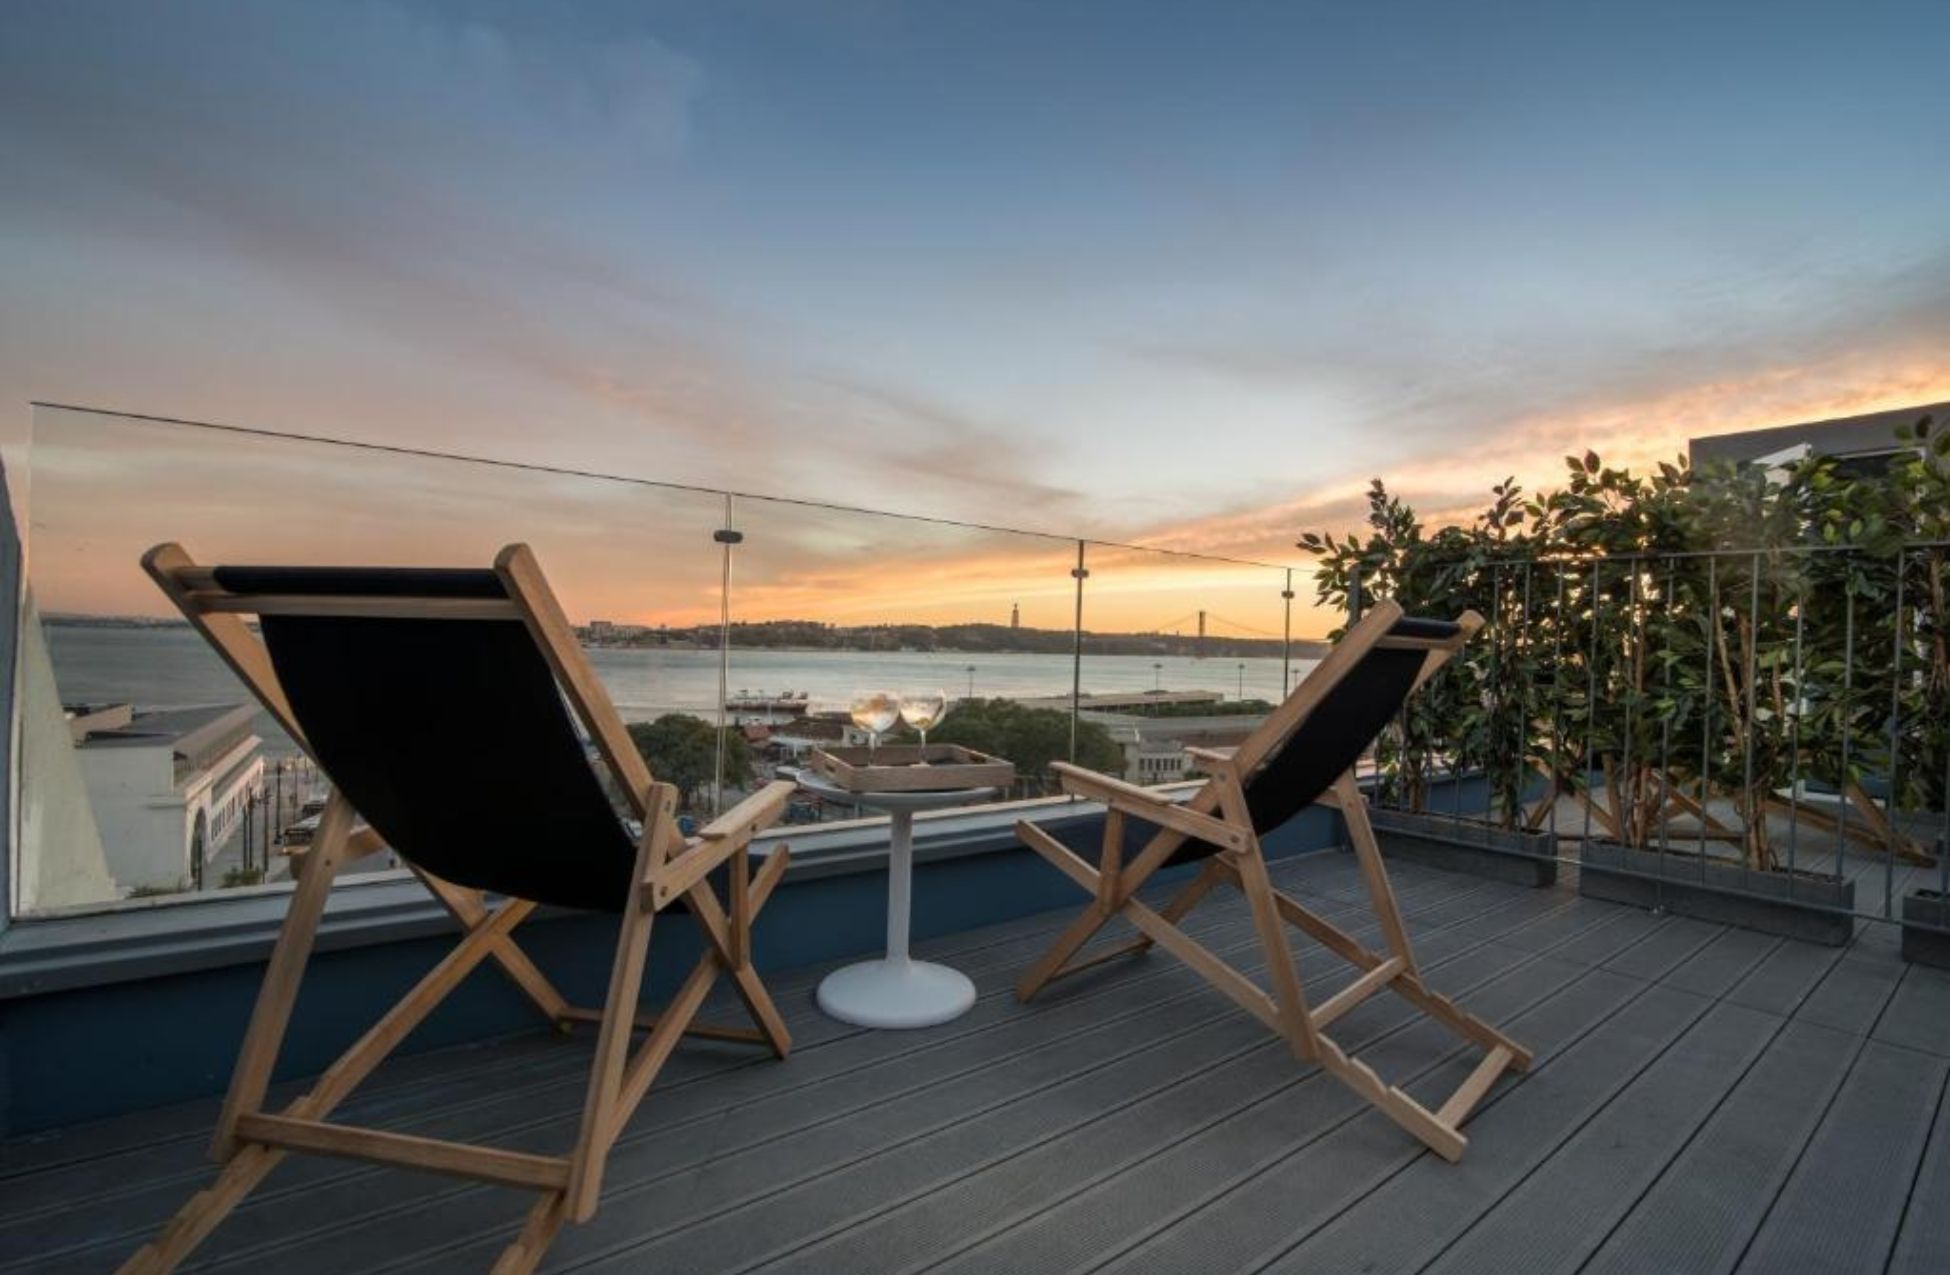 LX Boutique Hotel - Best Hotels In Lisbon